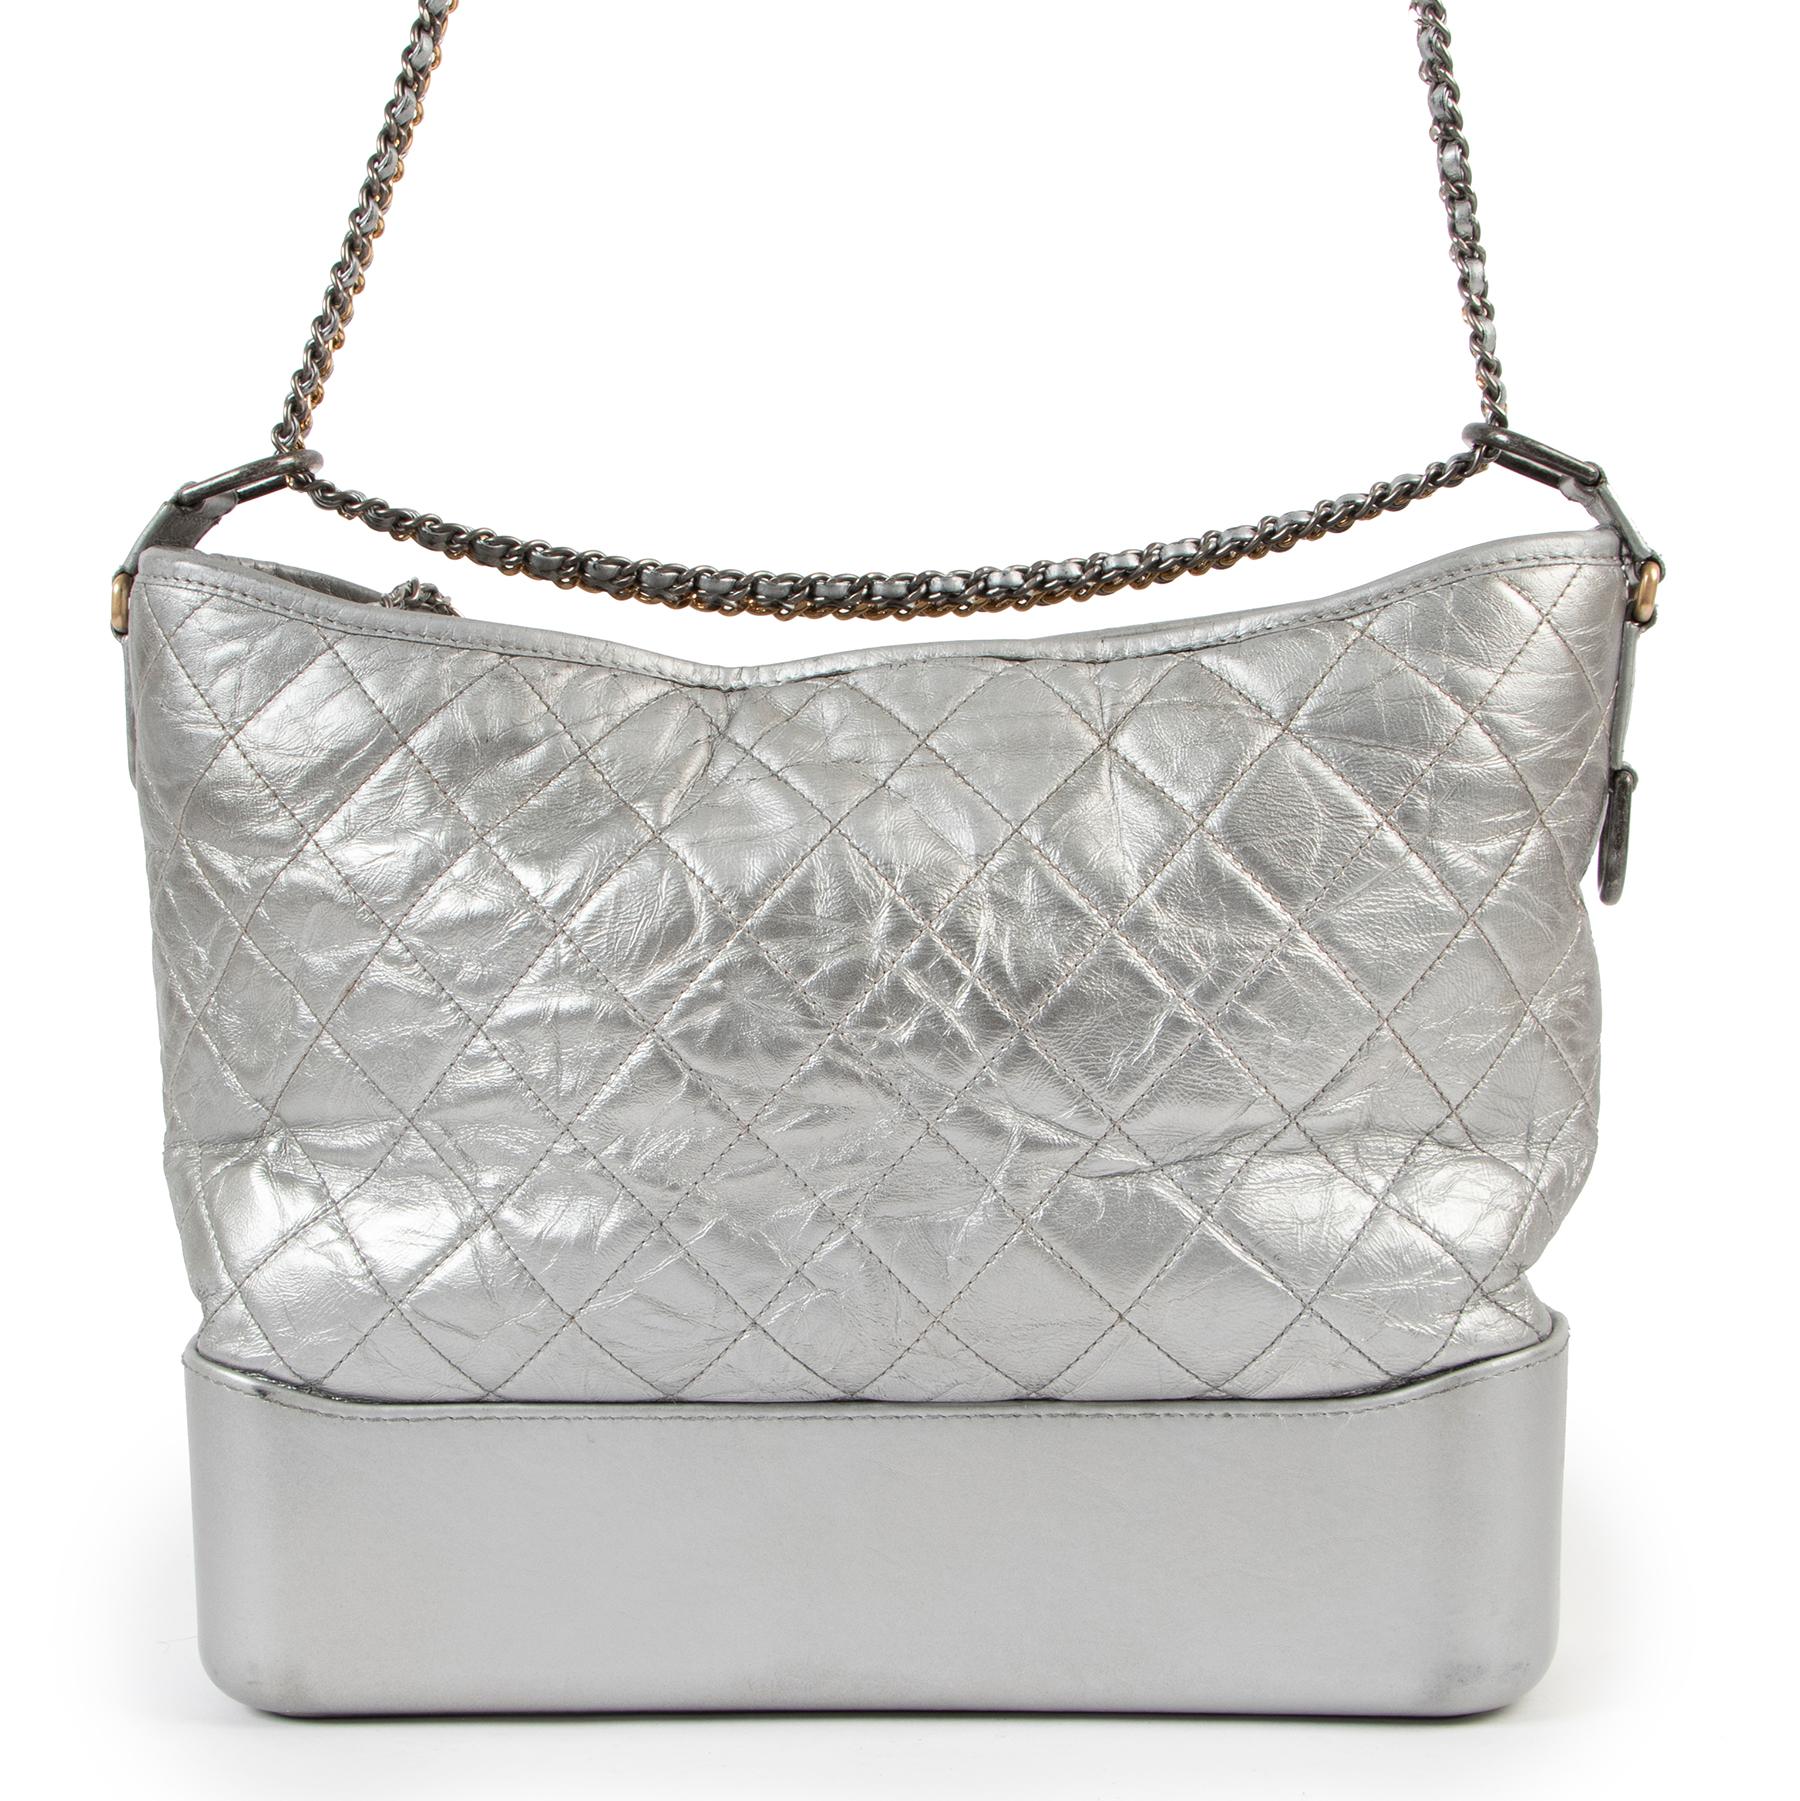 Latest IT bag from Karl Lagerfeld's creation. This silver iteration translated the Gabrielle hobo bag into a statement piece. Features a sturdy base that provides structure for the quilted leather upper, the bag comes with a unique chain strap